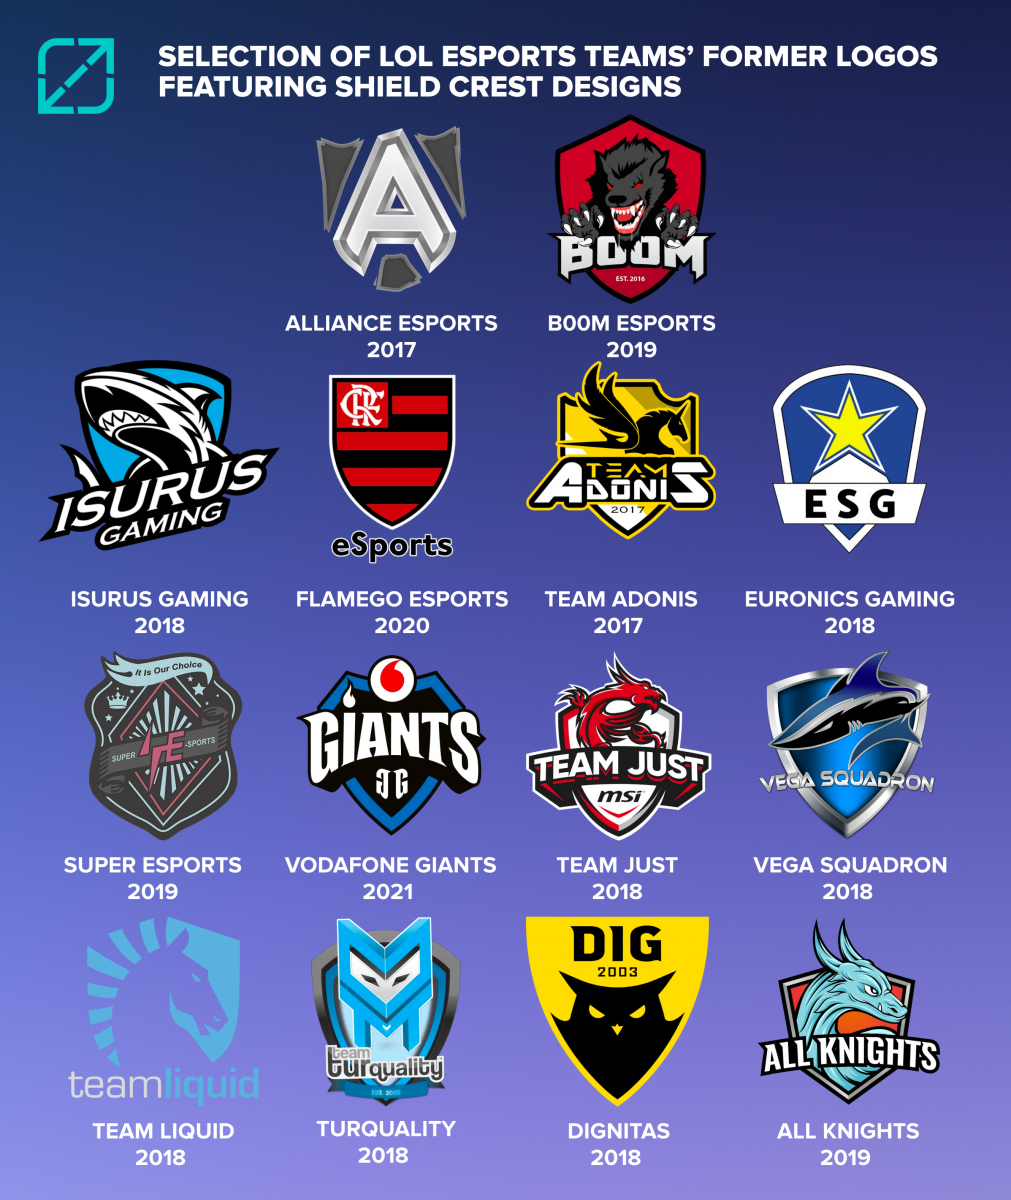 SELECTION OF LOL ESPORTS TEAMS’ FORMER LOGOS FEATURING SHIELD CREST DESIGNS 